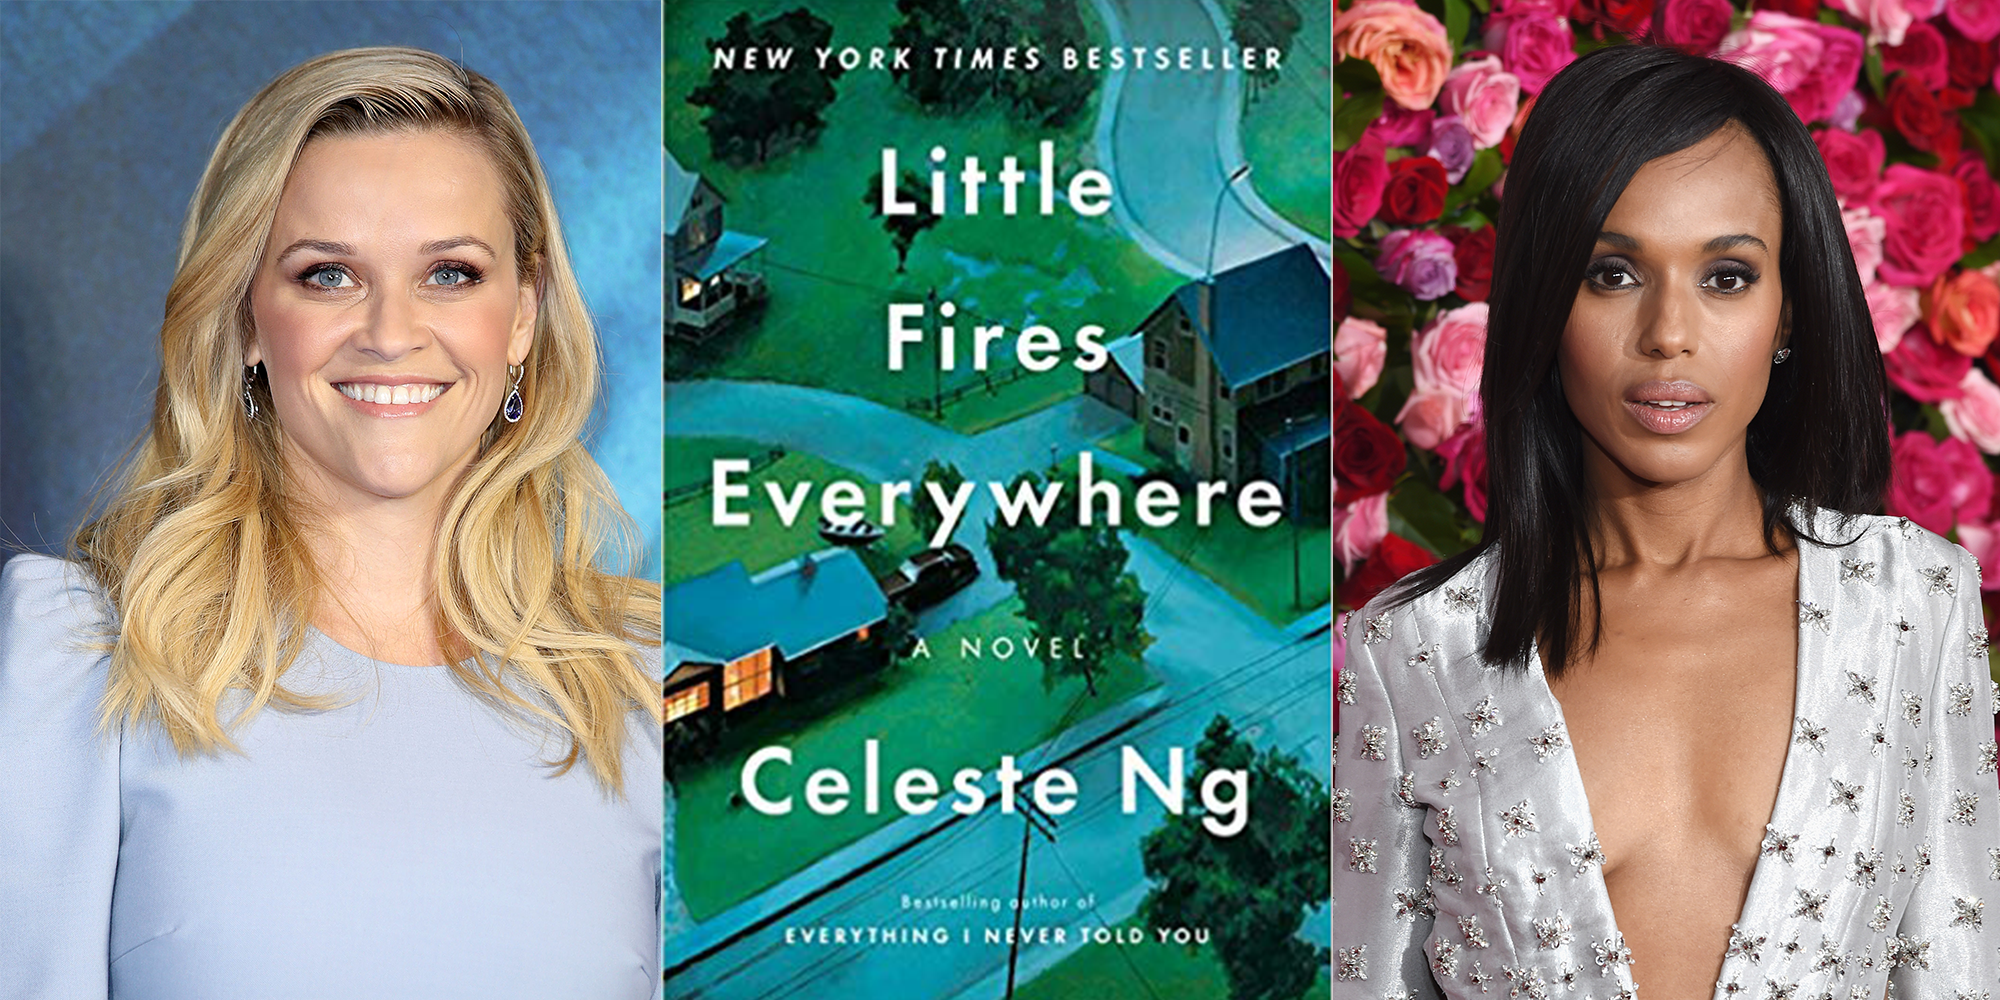 Reese Witherspoon and Kerry Washington Will Co-Executive Produce and Star in Little Fires Everywhere on Hulu